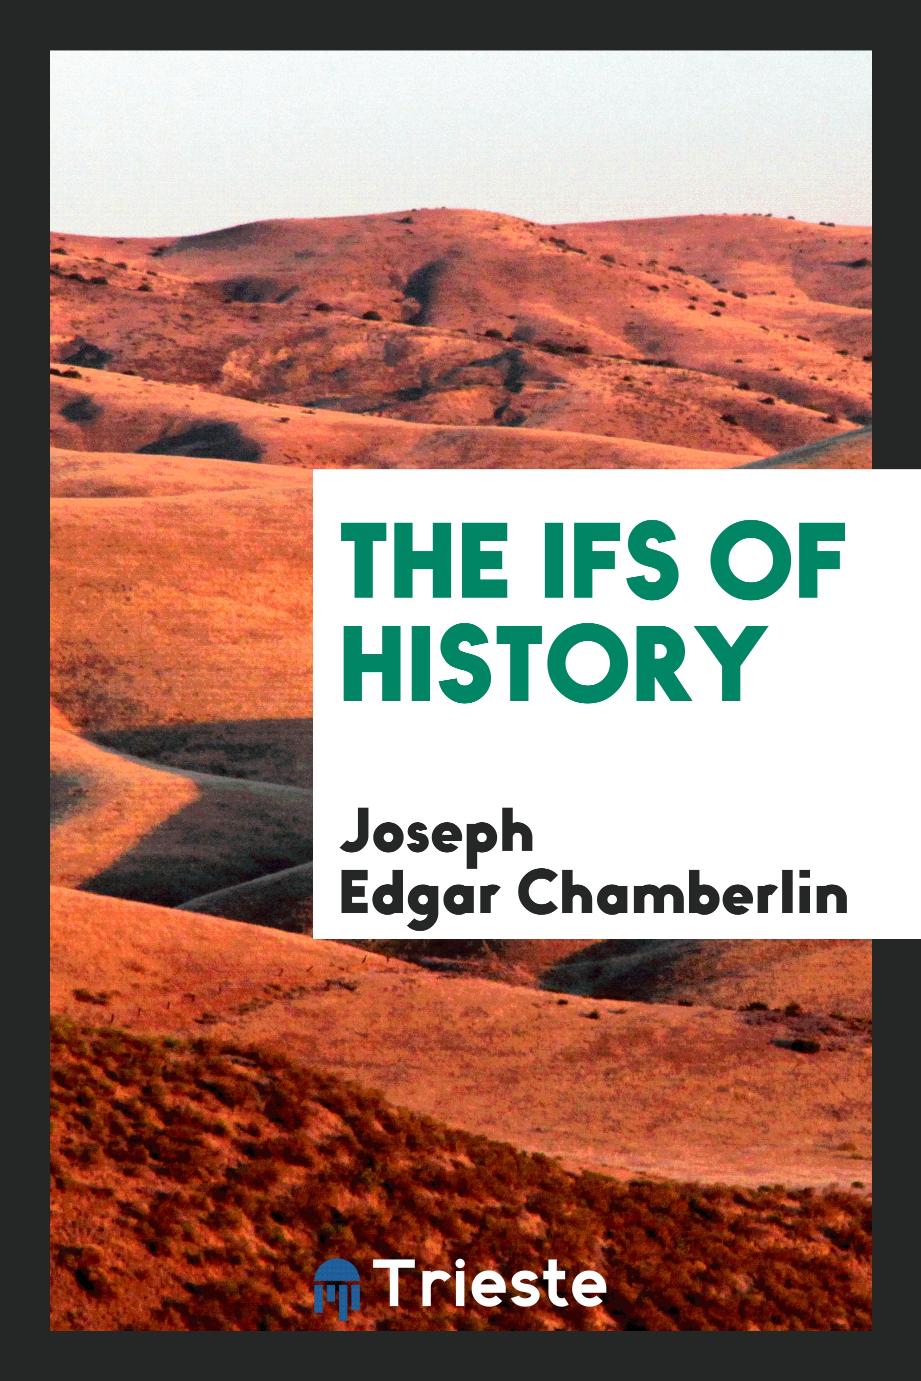 The ifs of history